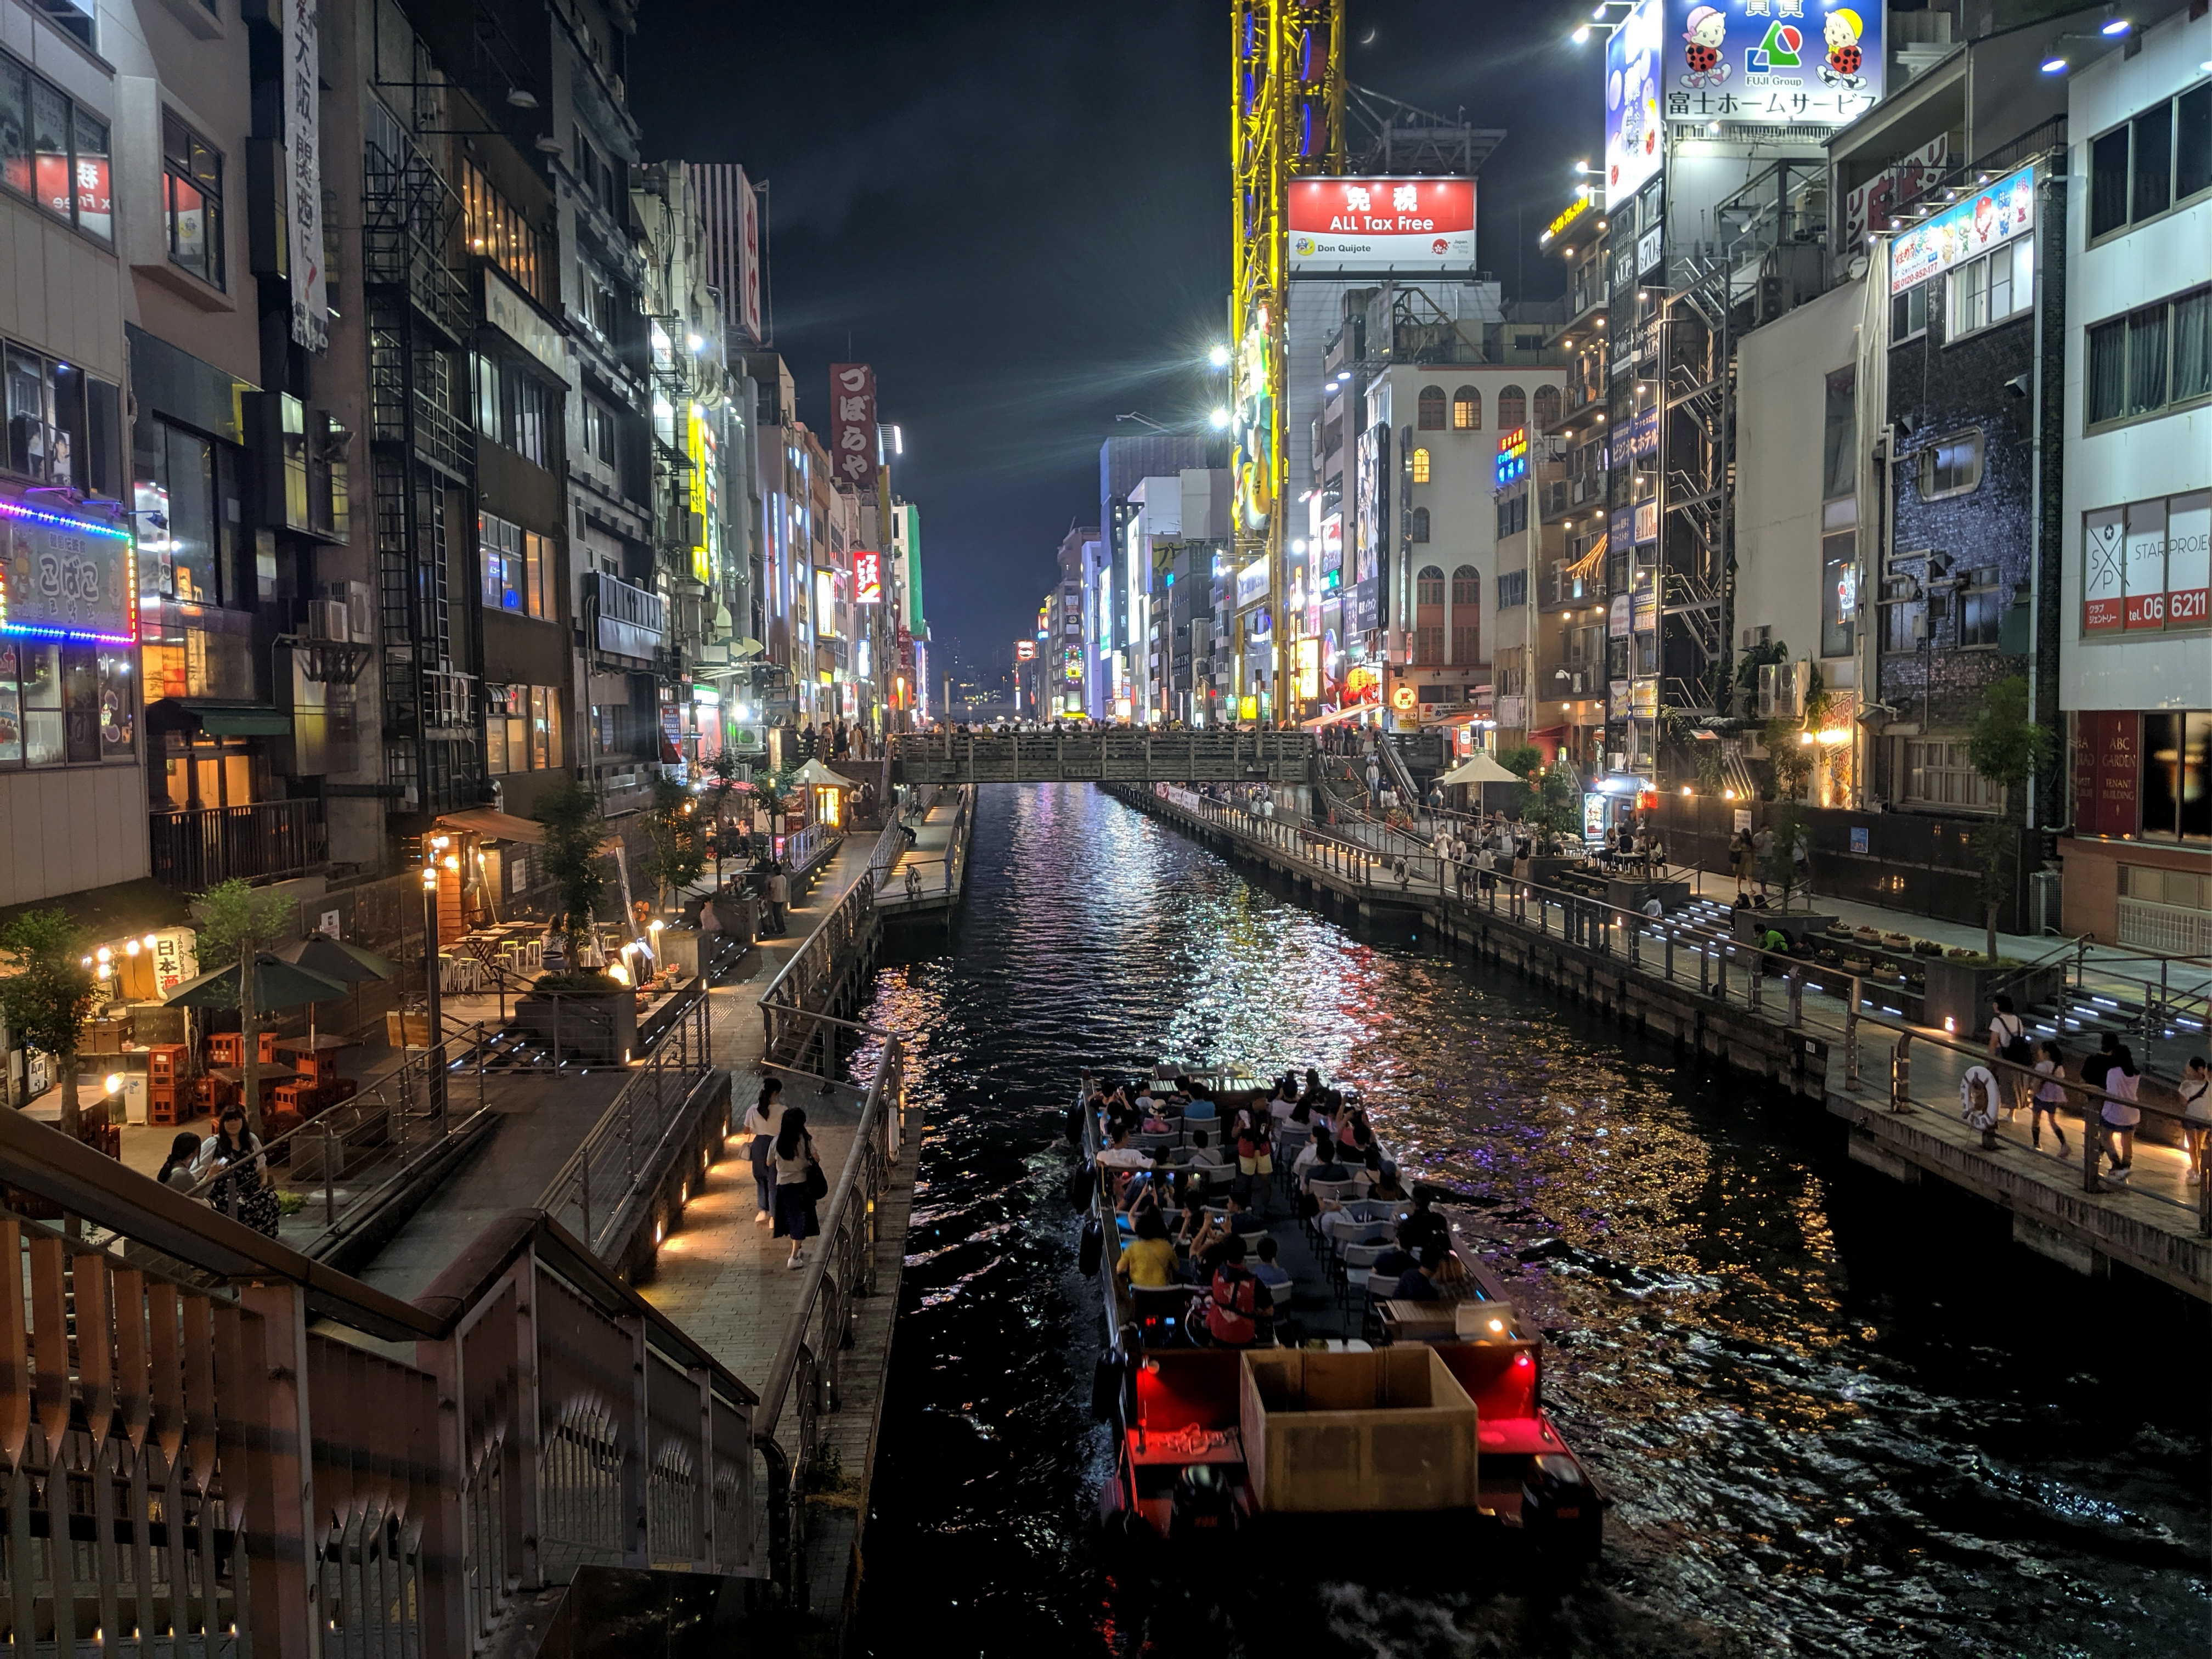 This Japanese Marketplace is one of the coolest in Osaka